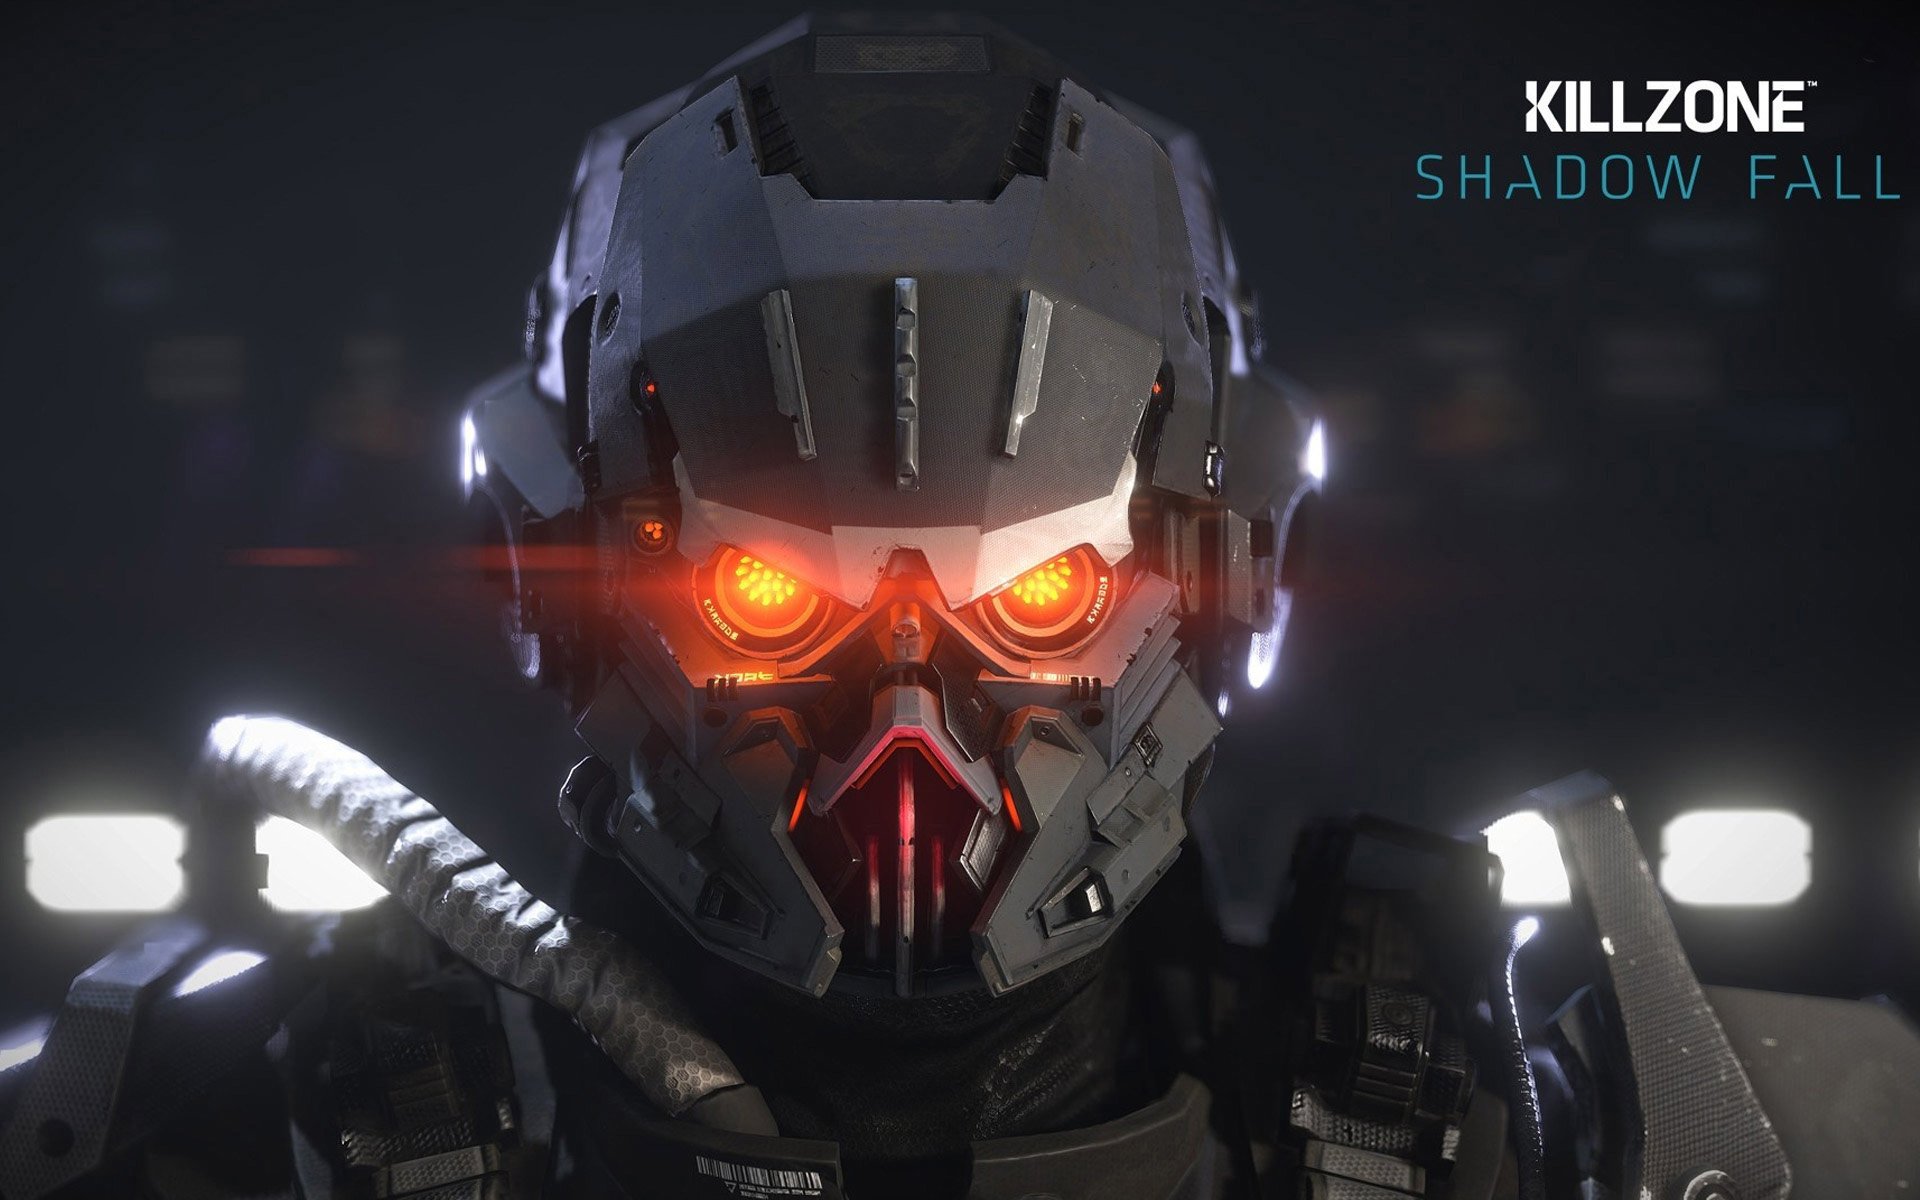 killzone, Shadow, Fall, Stealth, Tactical, Warrior, Sci fi, Futuristic, Shooter, Action, Fighting, Poster Wallpaper